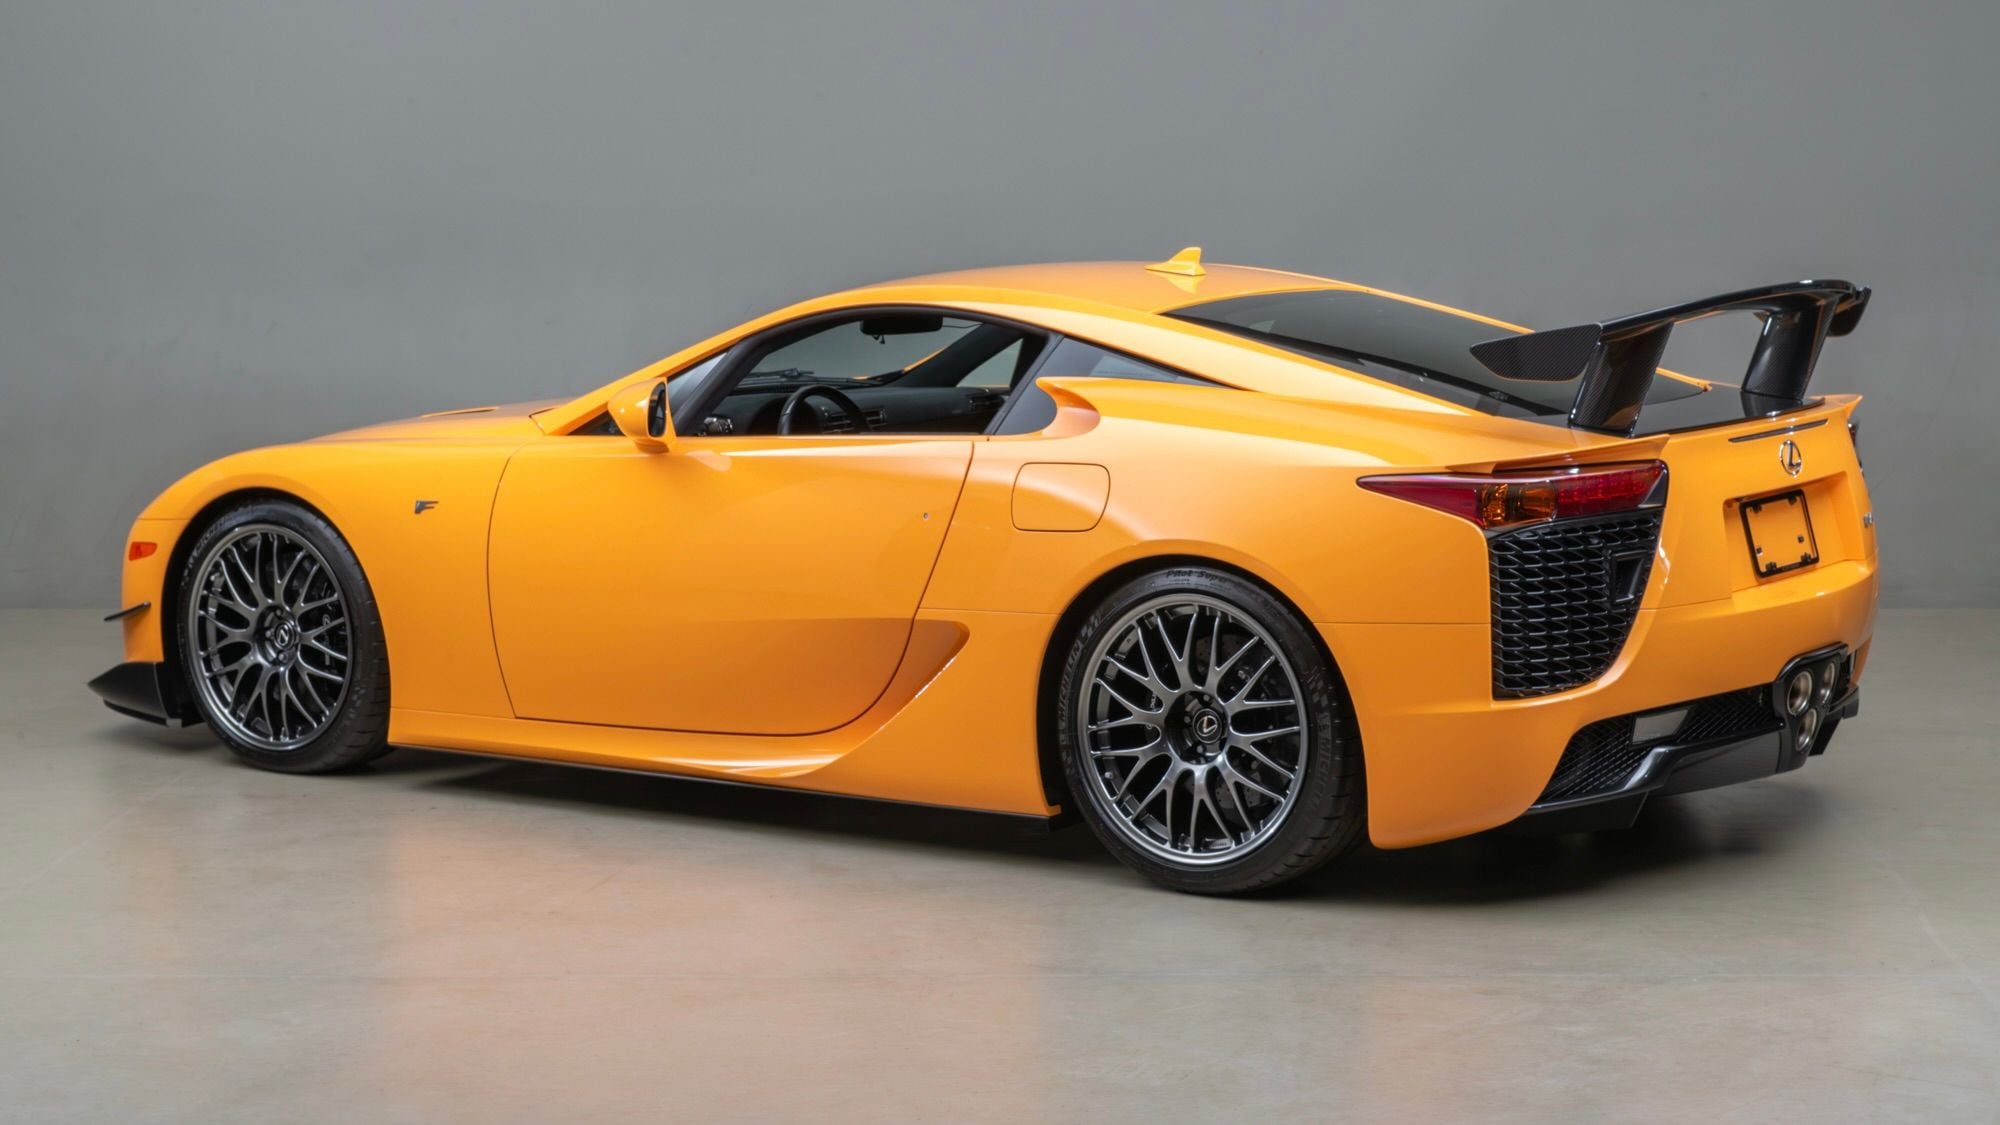 One-of-64 Lexus LFA Nurburgring Edition up for Grabs | Clublexus